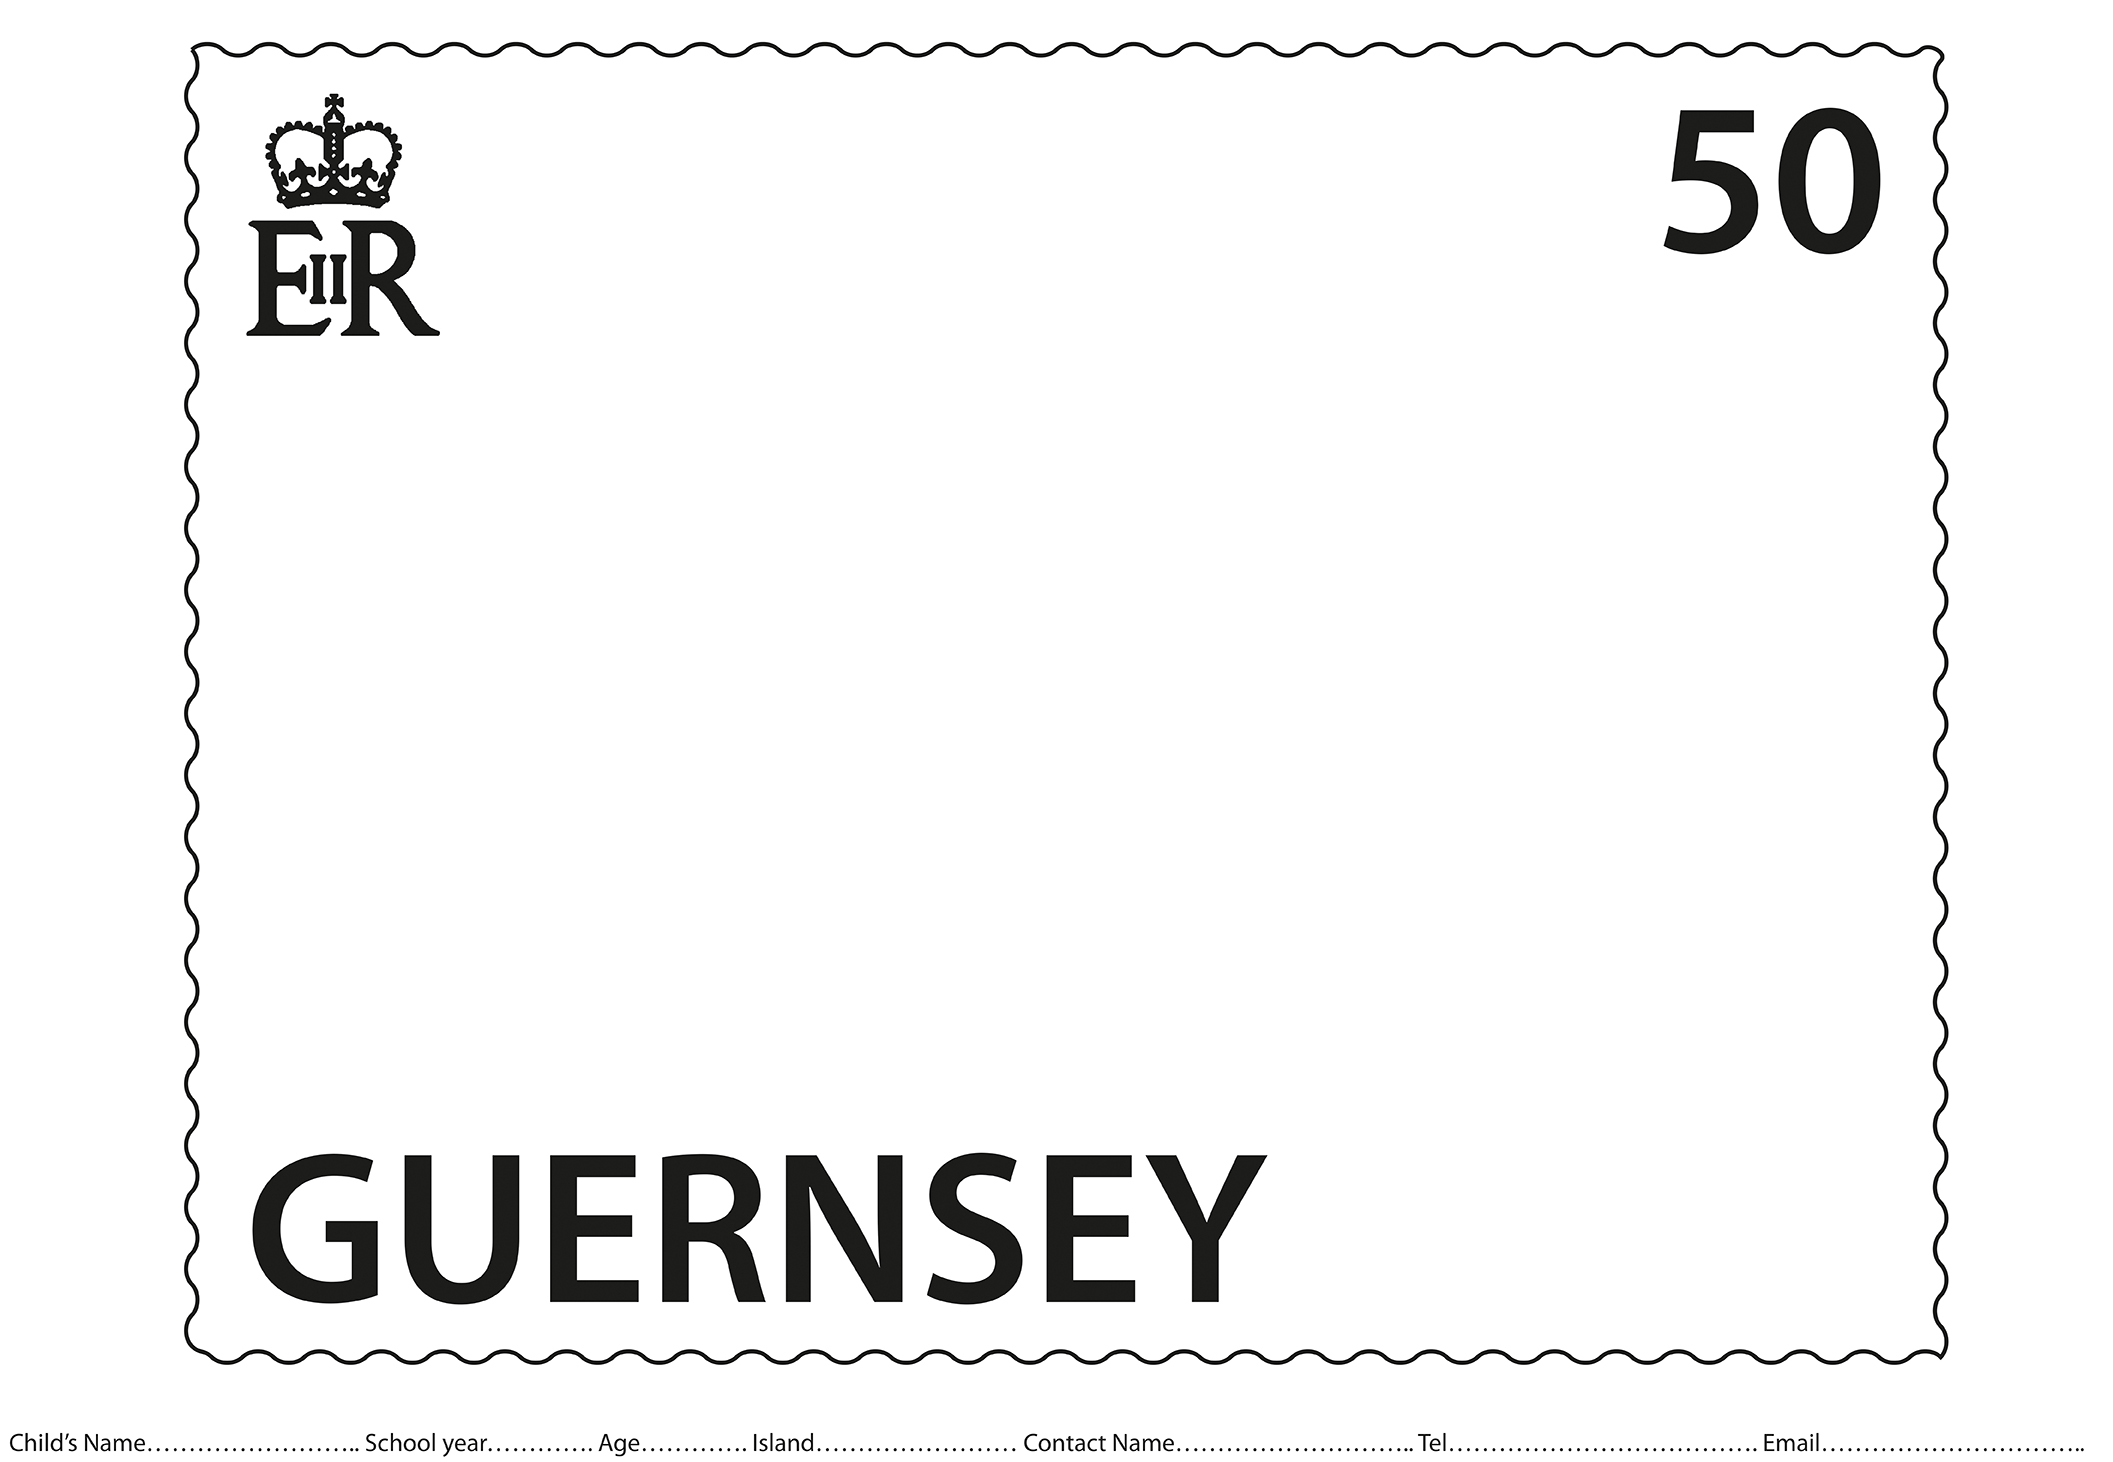 Local children invited to put their stamp on #GuernseyTogether charity competition